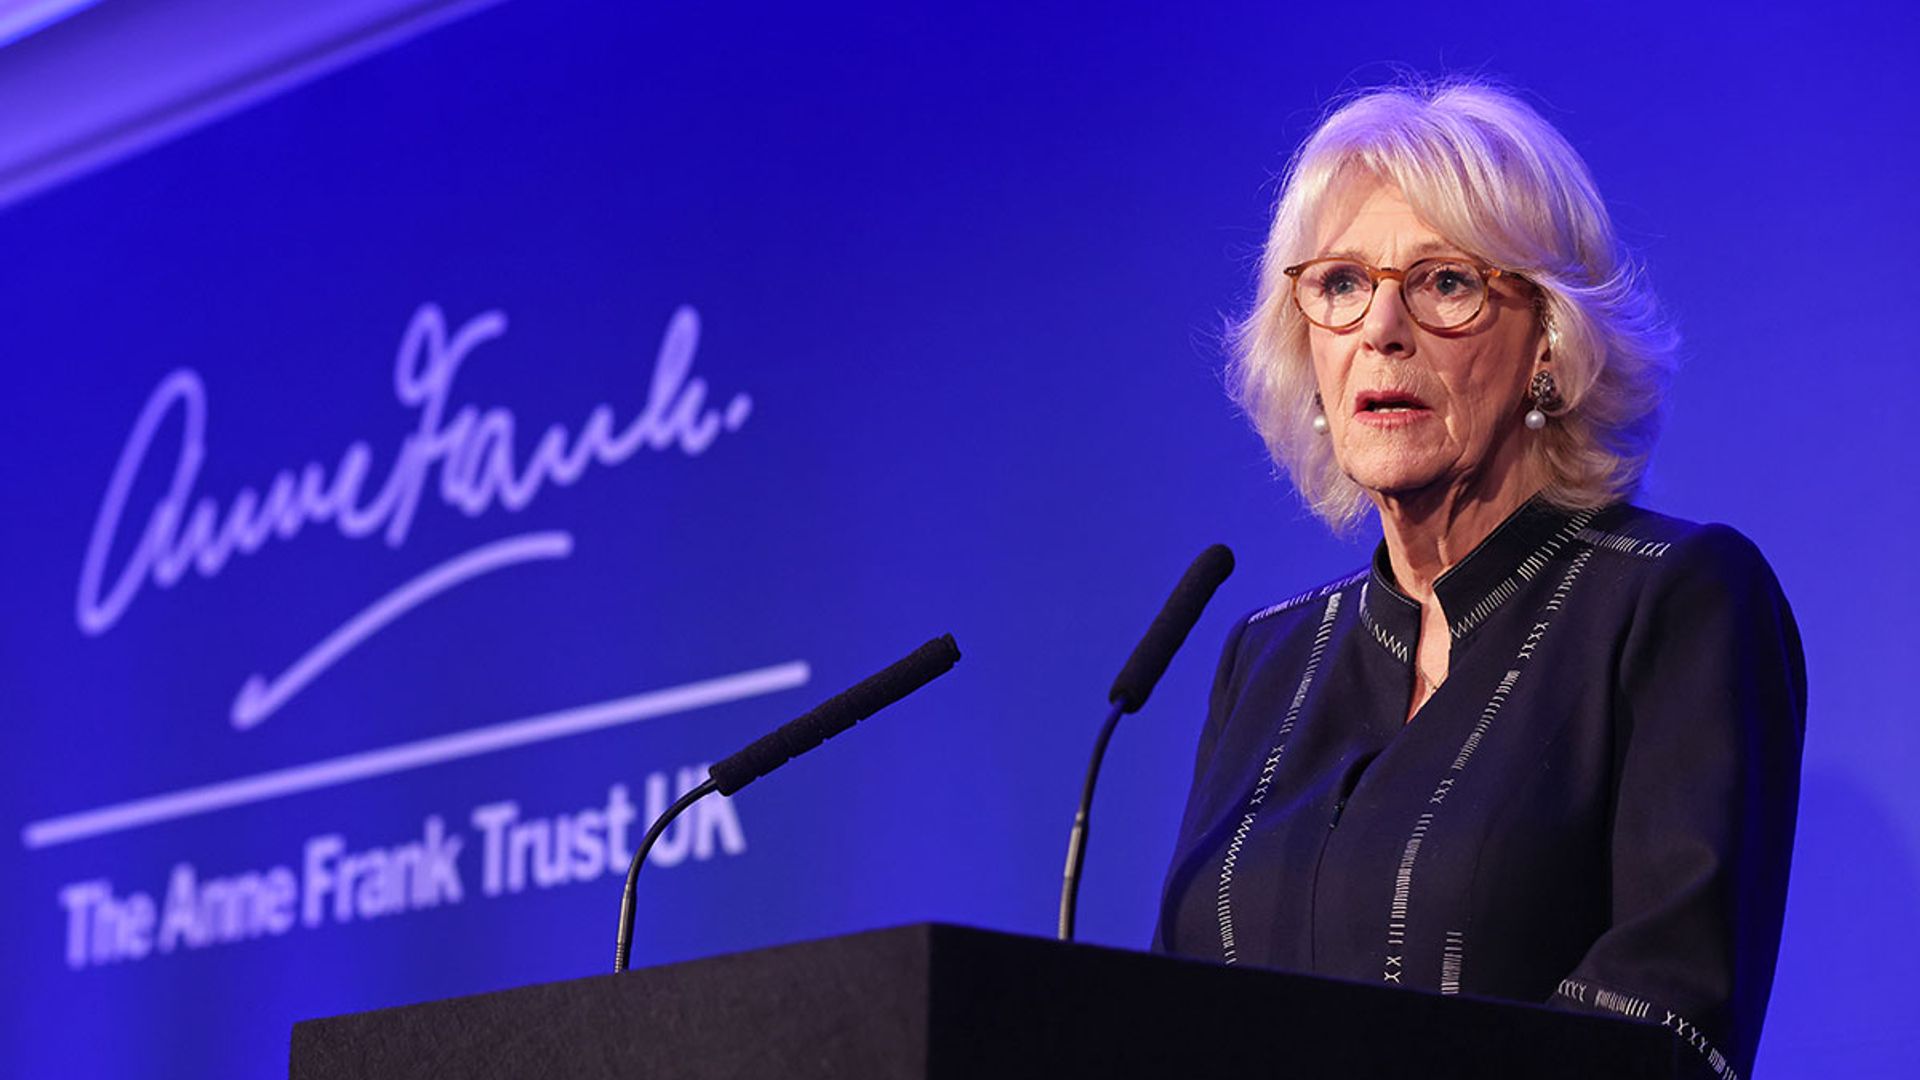 The Duchess of Cornwall makes important plea: 'Let us not be bystanders to injustice or prejudice'